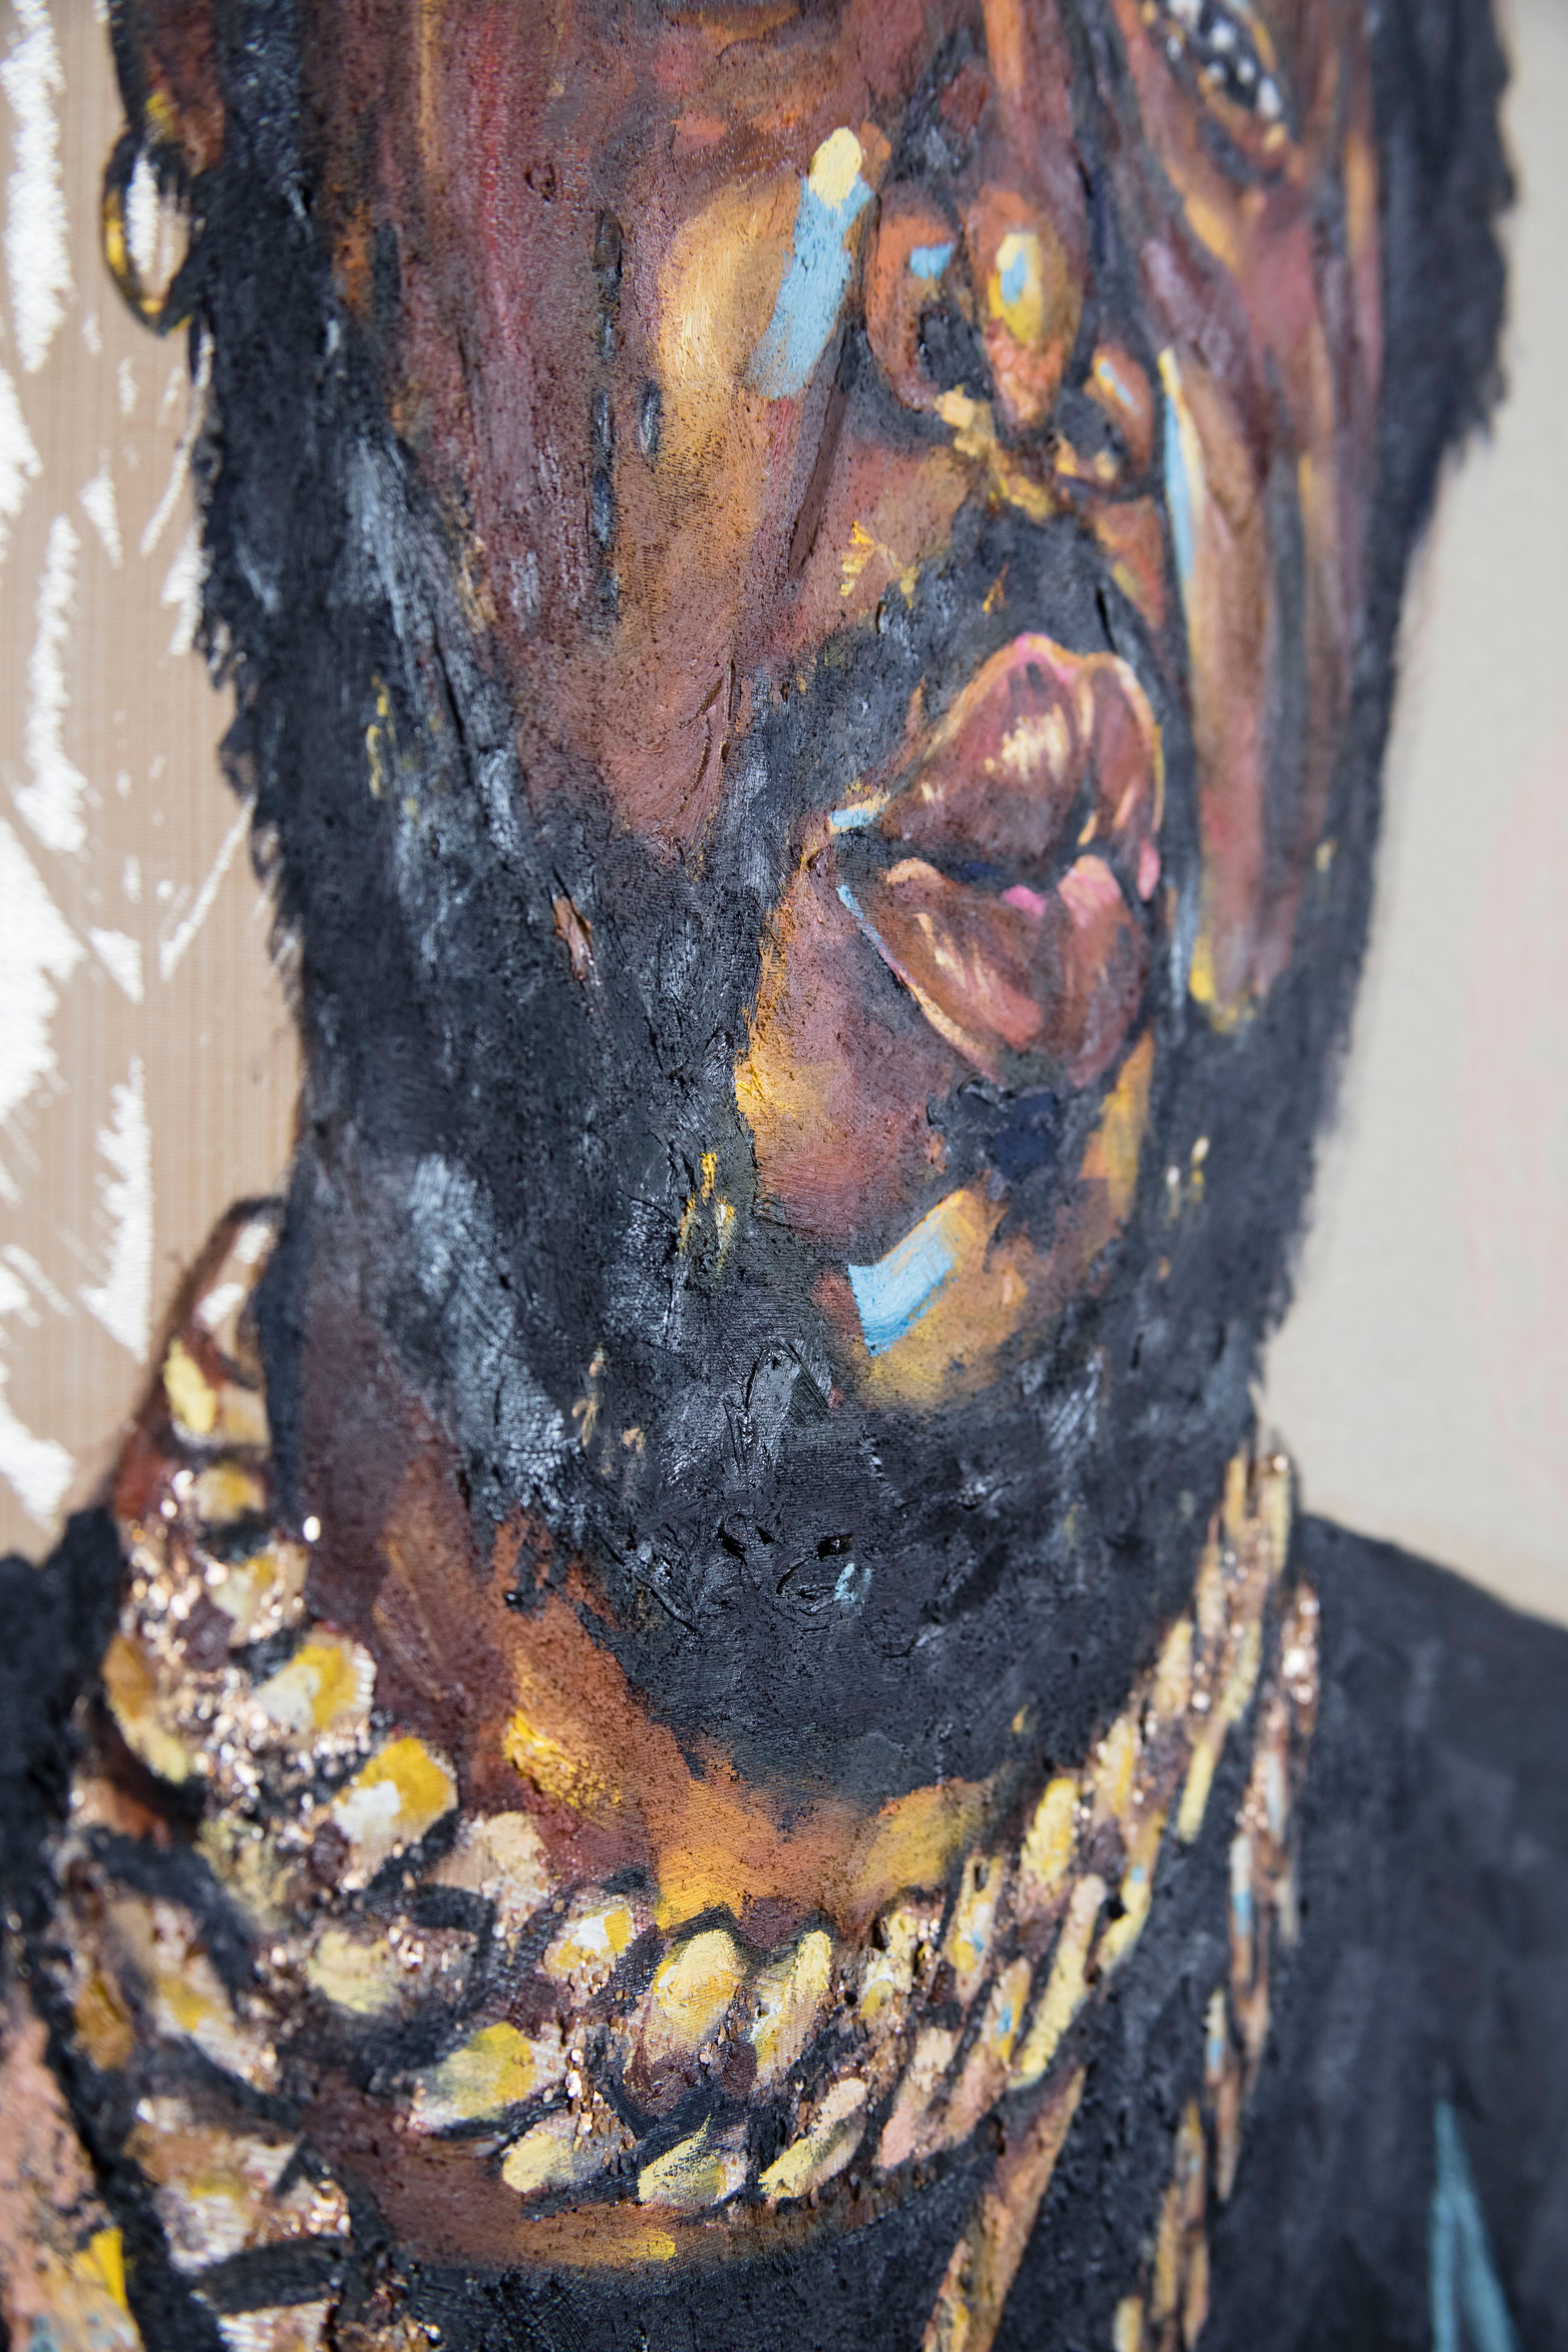 LA MAQUINA - Portrait Painting of Conway the Machine, Rapper, Gold, Black For Sale 4